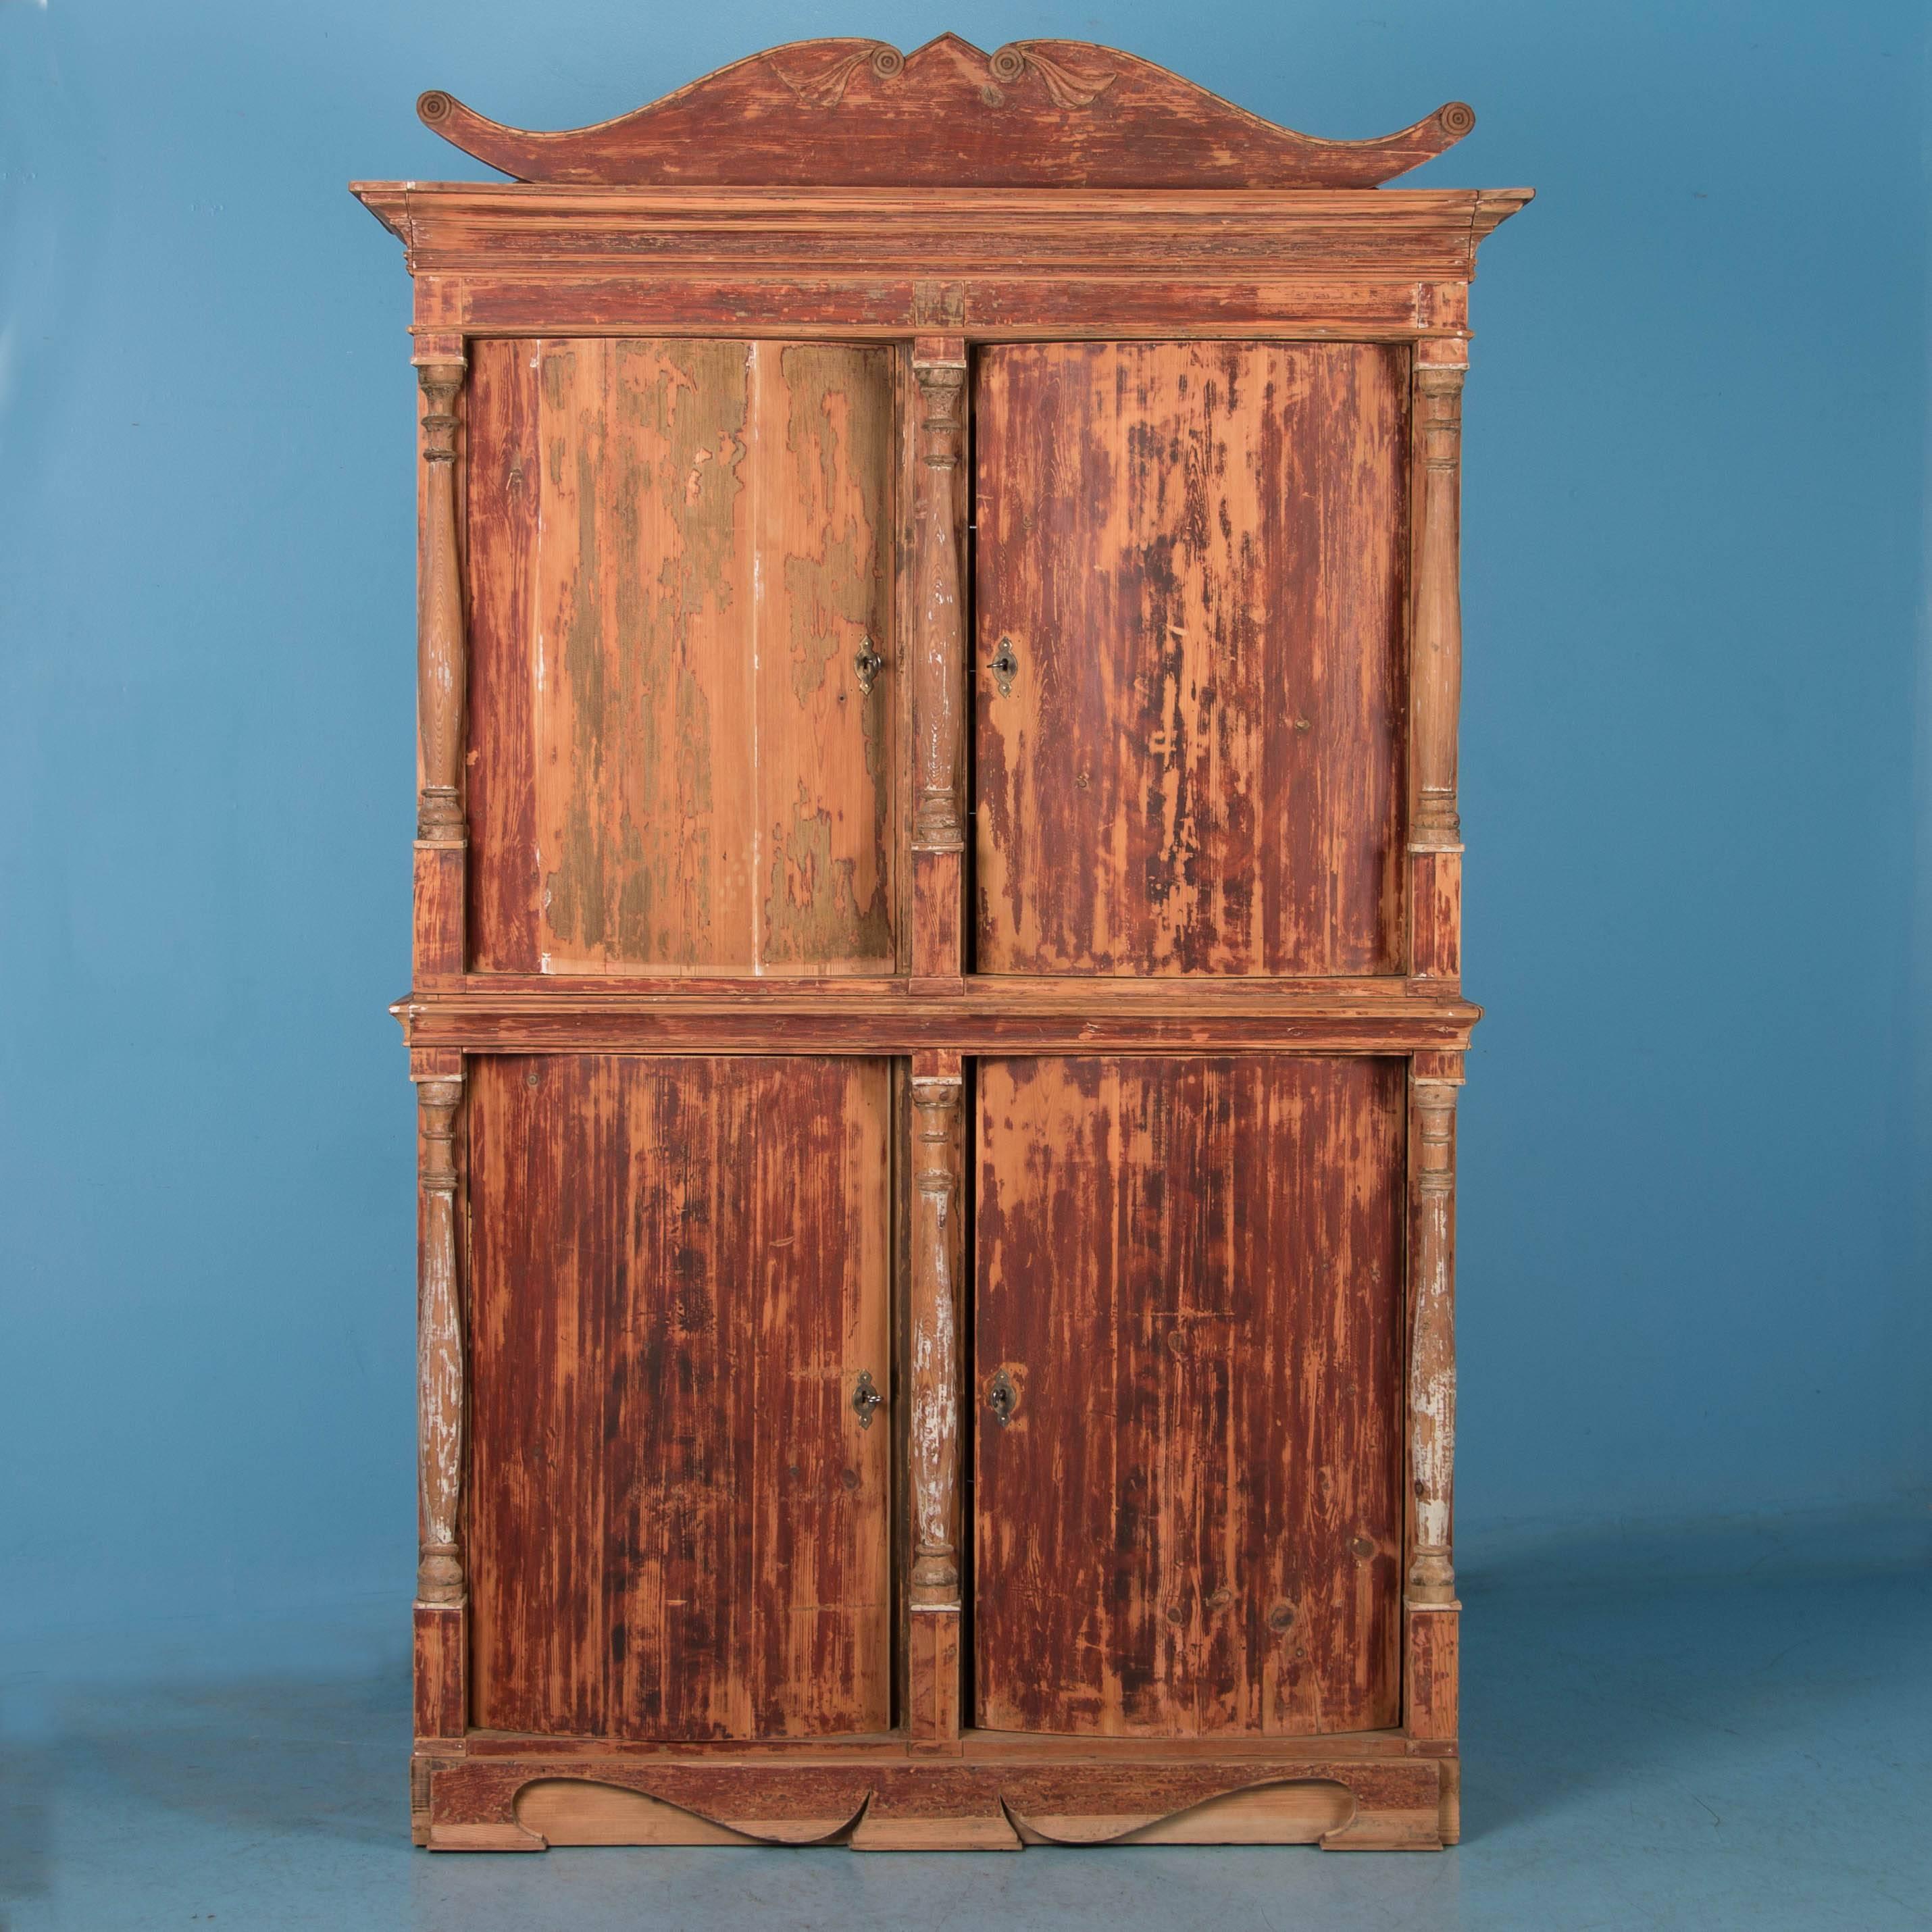 The great appeal of this remarkable cabinet is largely due to the original brick red paint, which has been scraped leaving a soft, raw feel to the finish. The six turned columns were originally painted white, now providing a subtle contrast to the